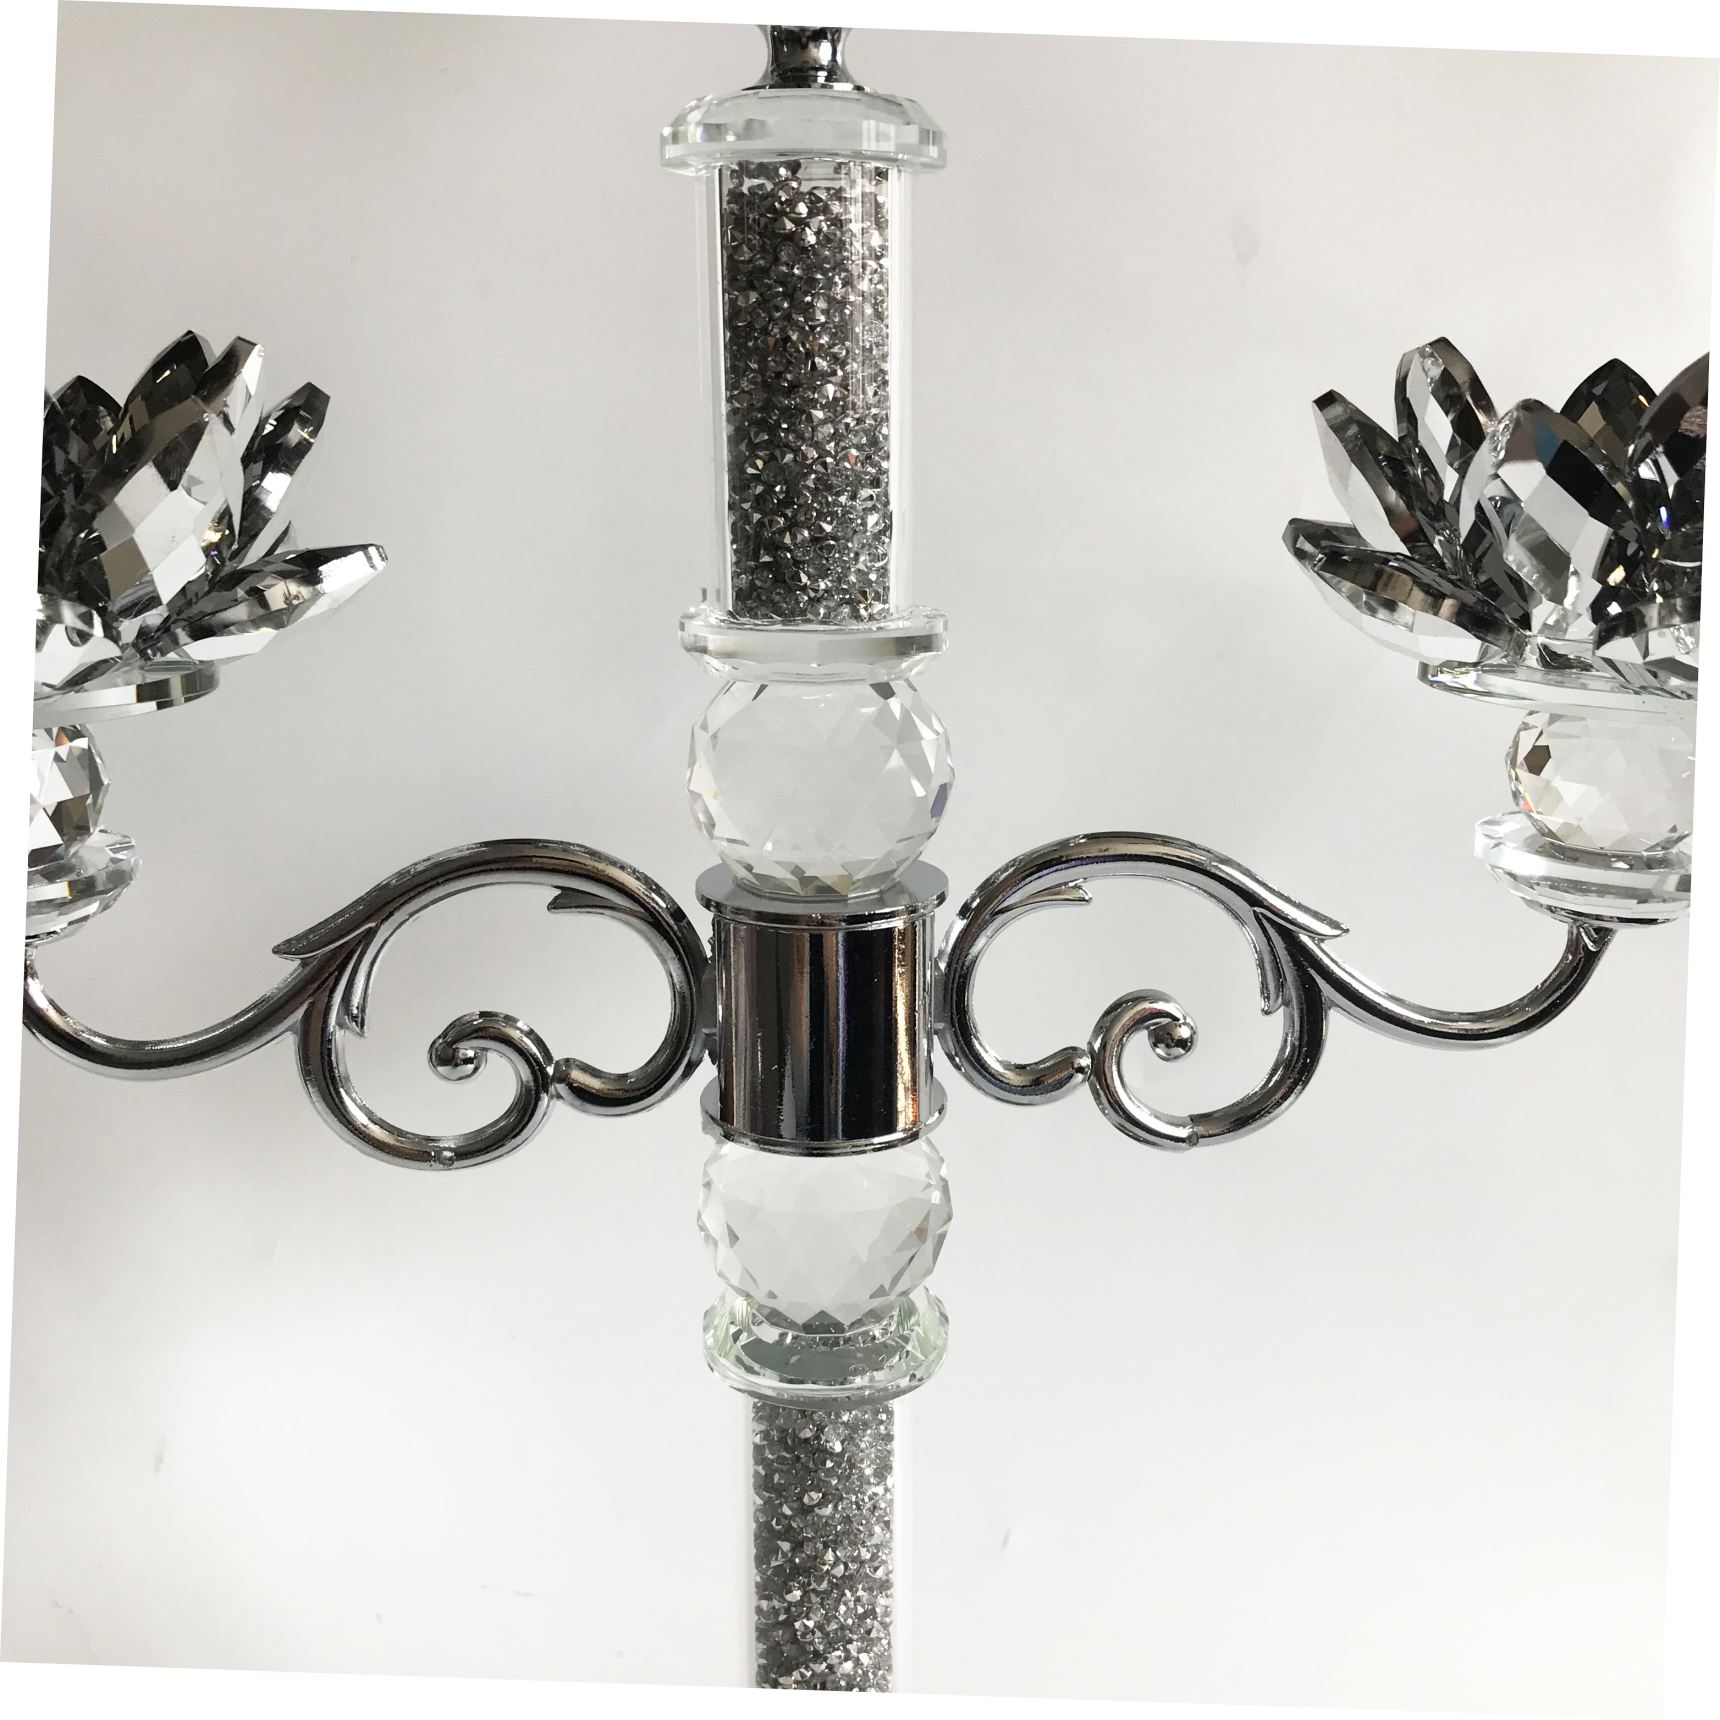 Shining 5 arms crystal candelabra centerpiece wedding party decoration black coated crystal glass lotus candle holder